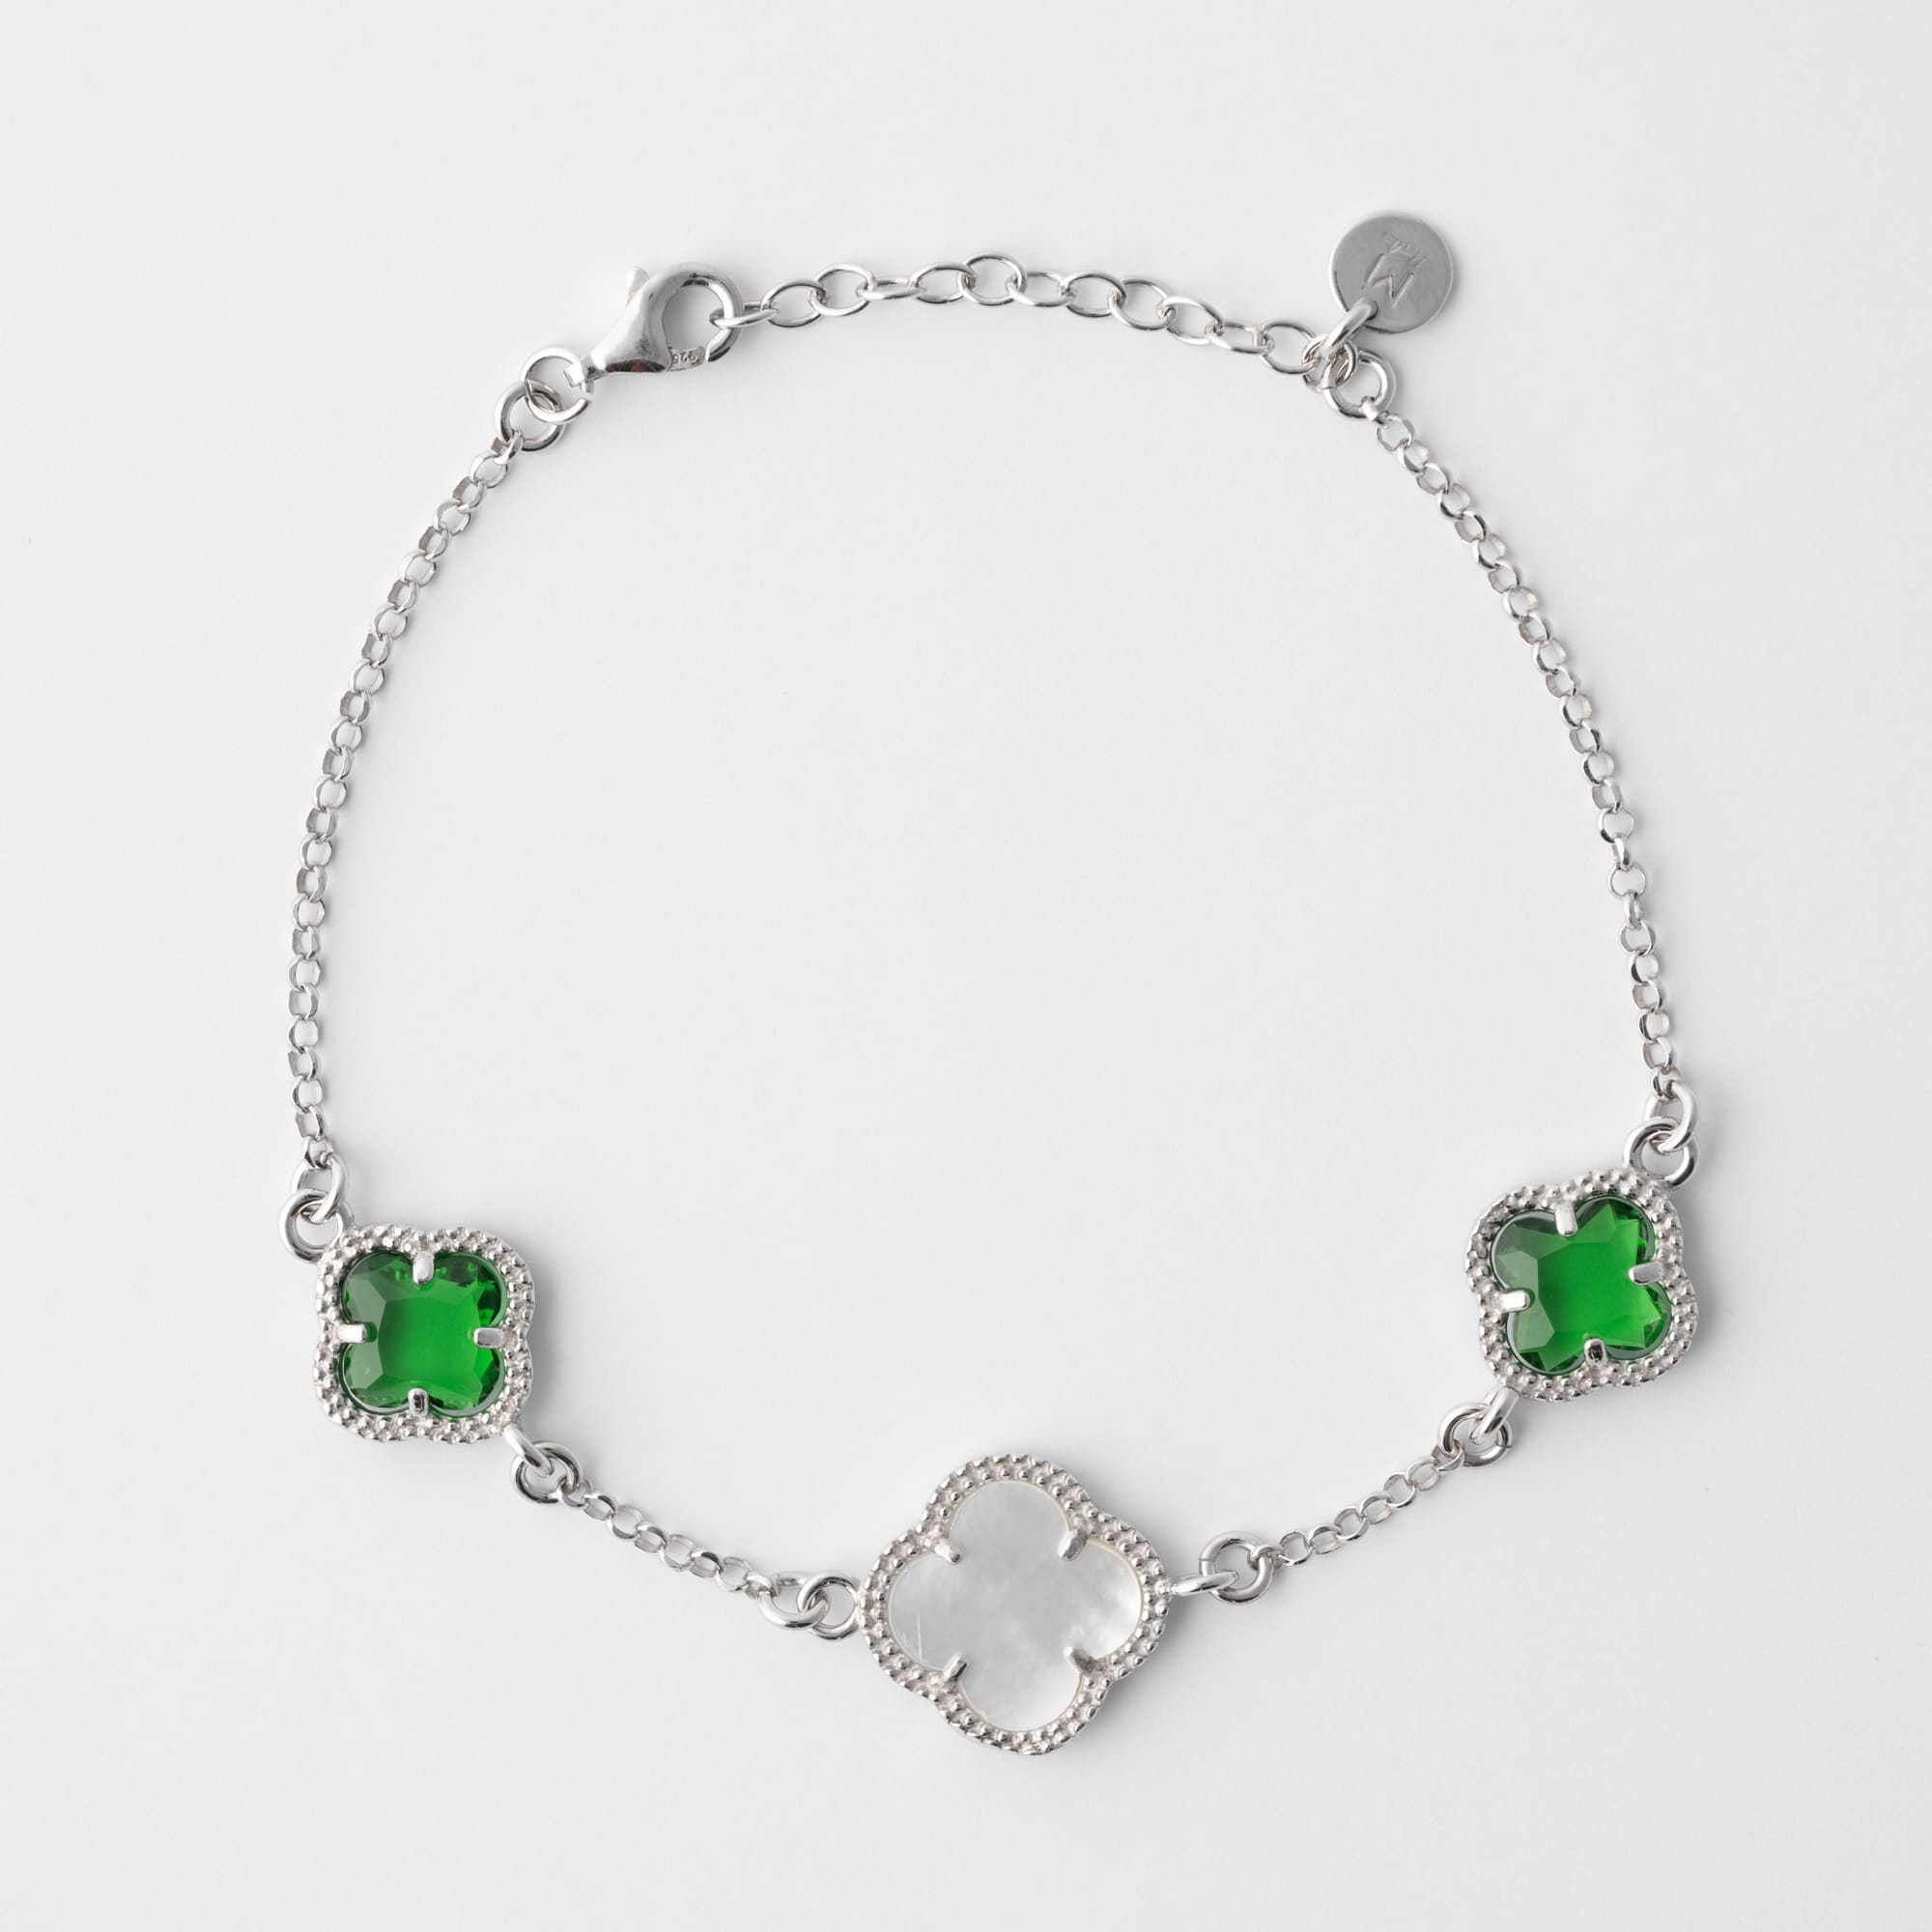 Clover bracelet with emerald quartz and mother of pearl